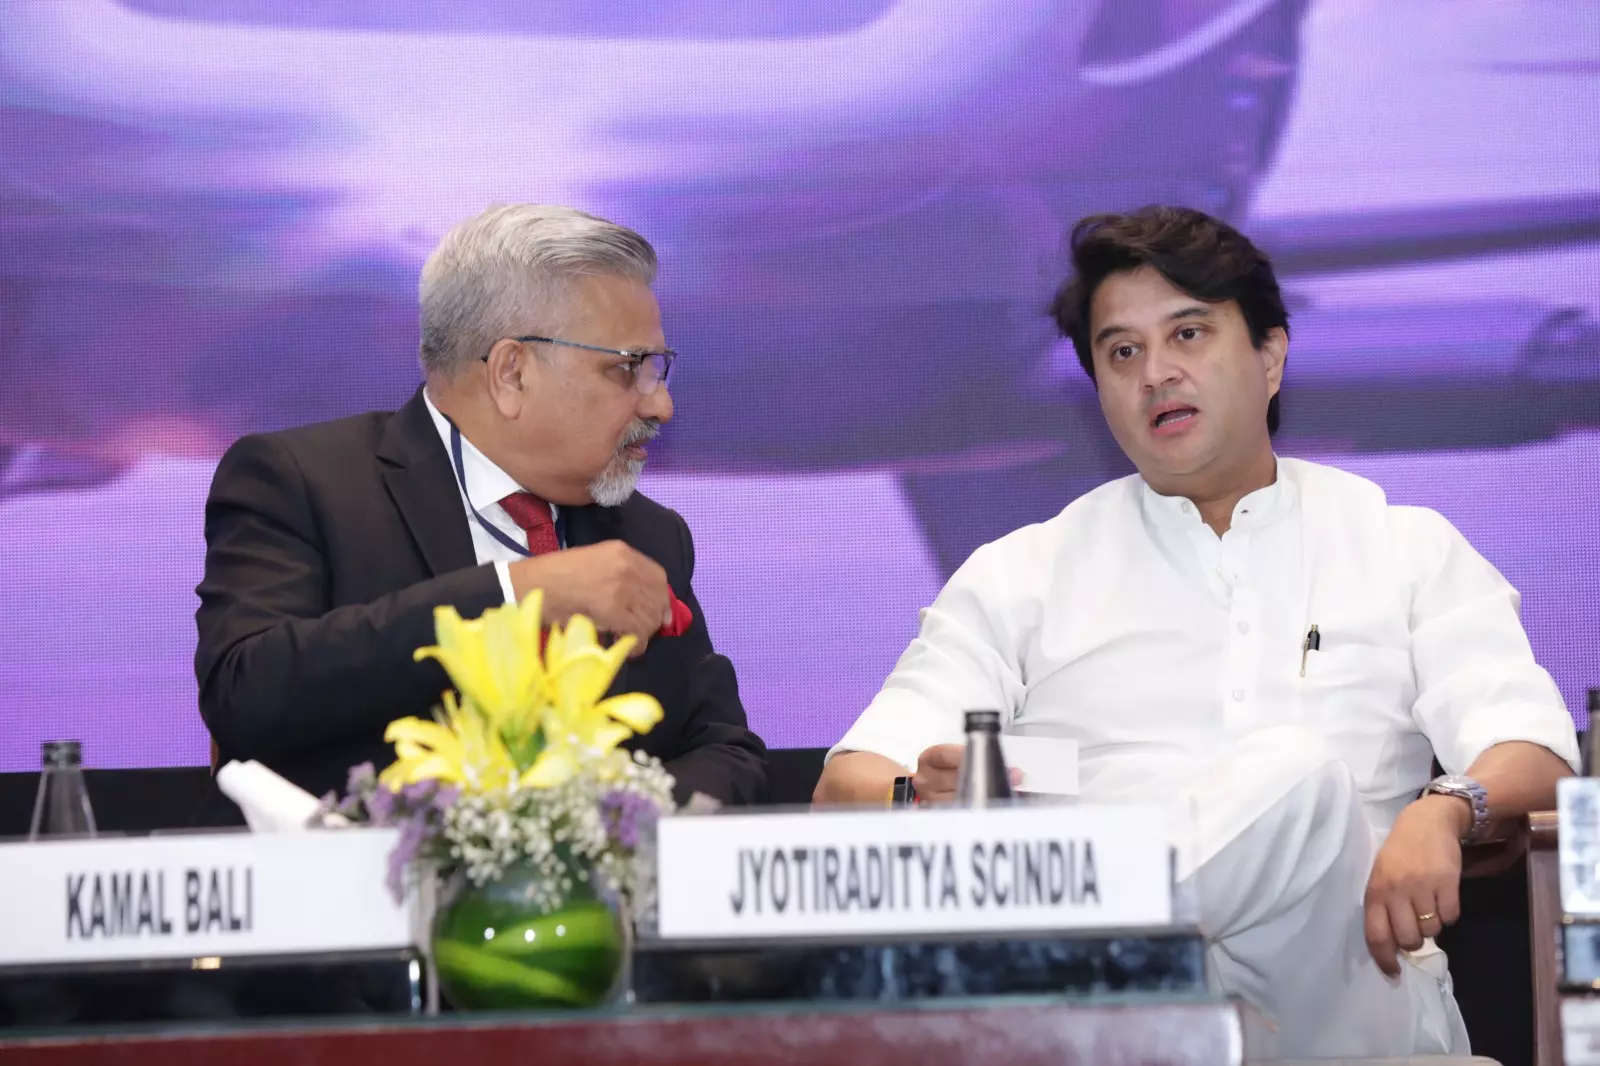 (Left) Kamal Bali, President and MD Volvo Group in India, and chairman, CII Southern Region and the union minister of civil aviation Jyotiraditya Scindia